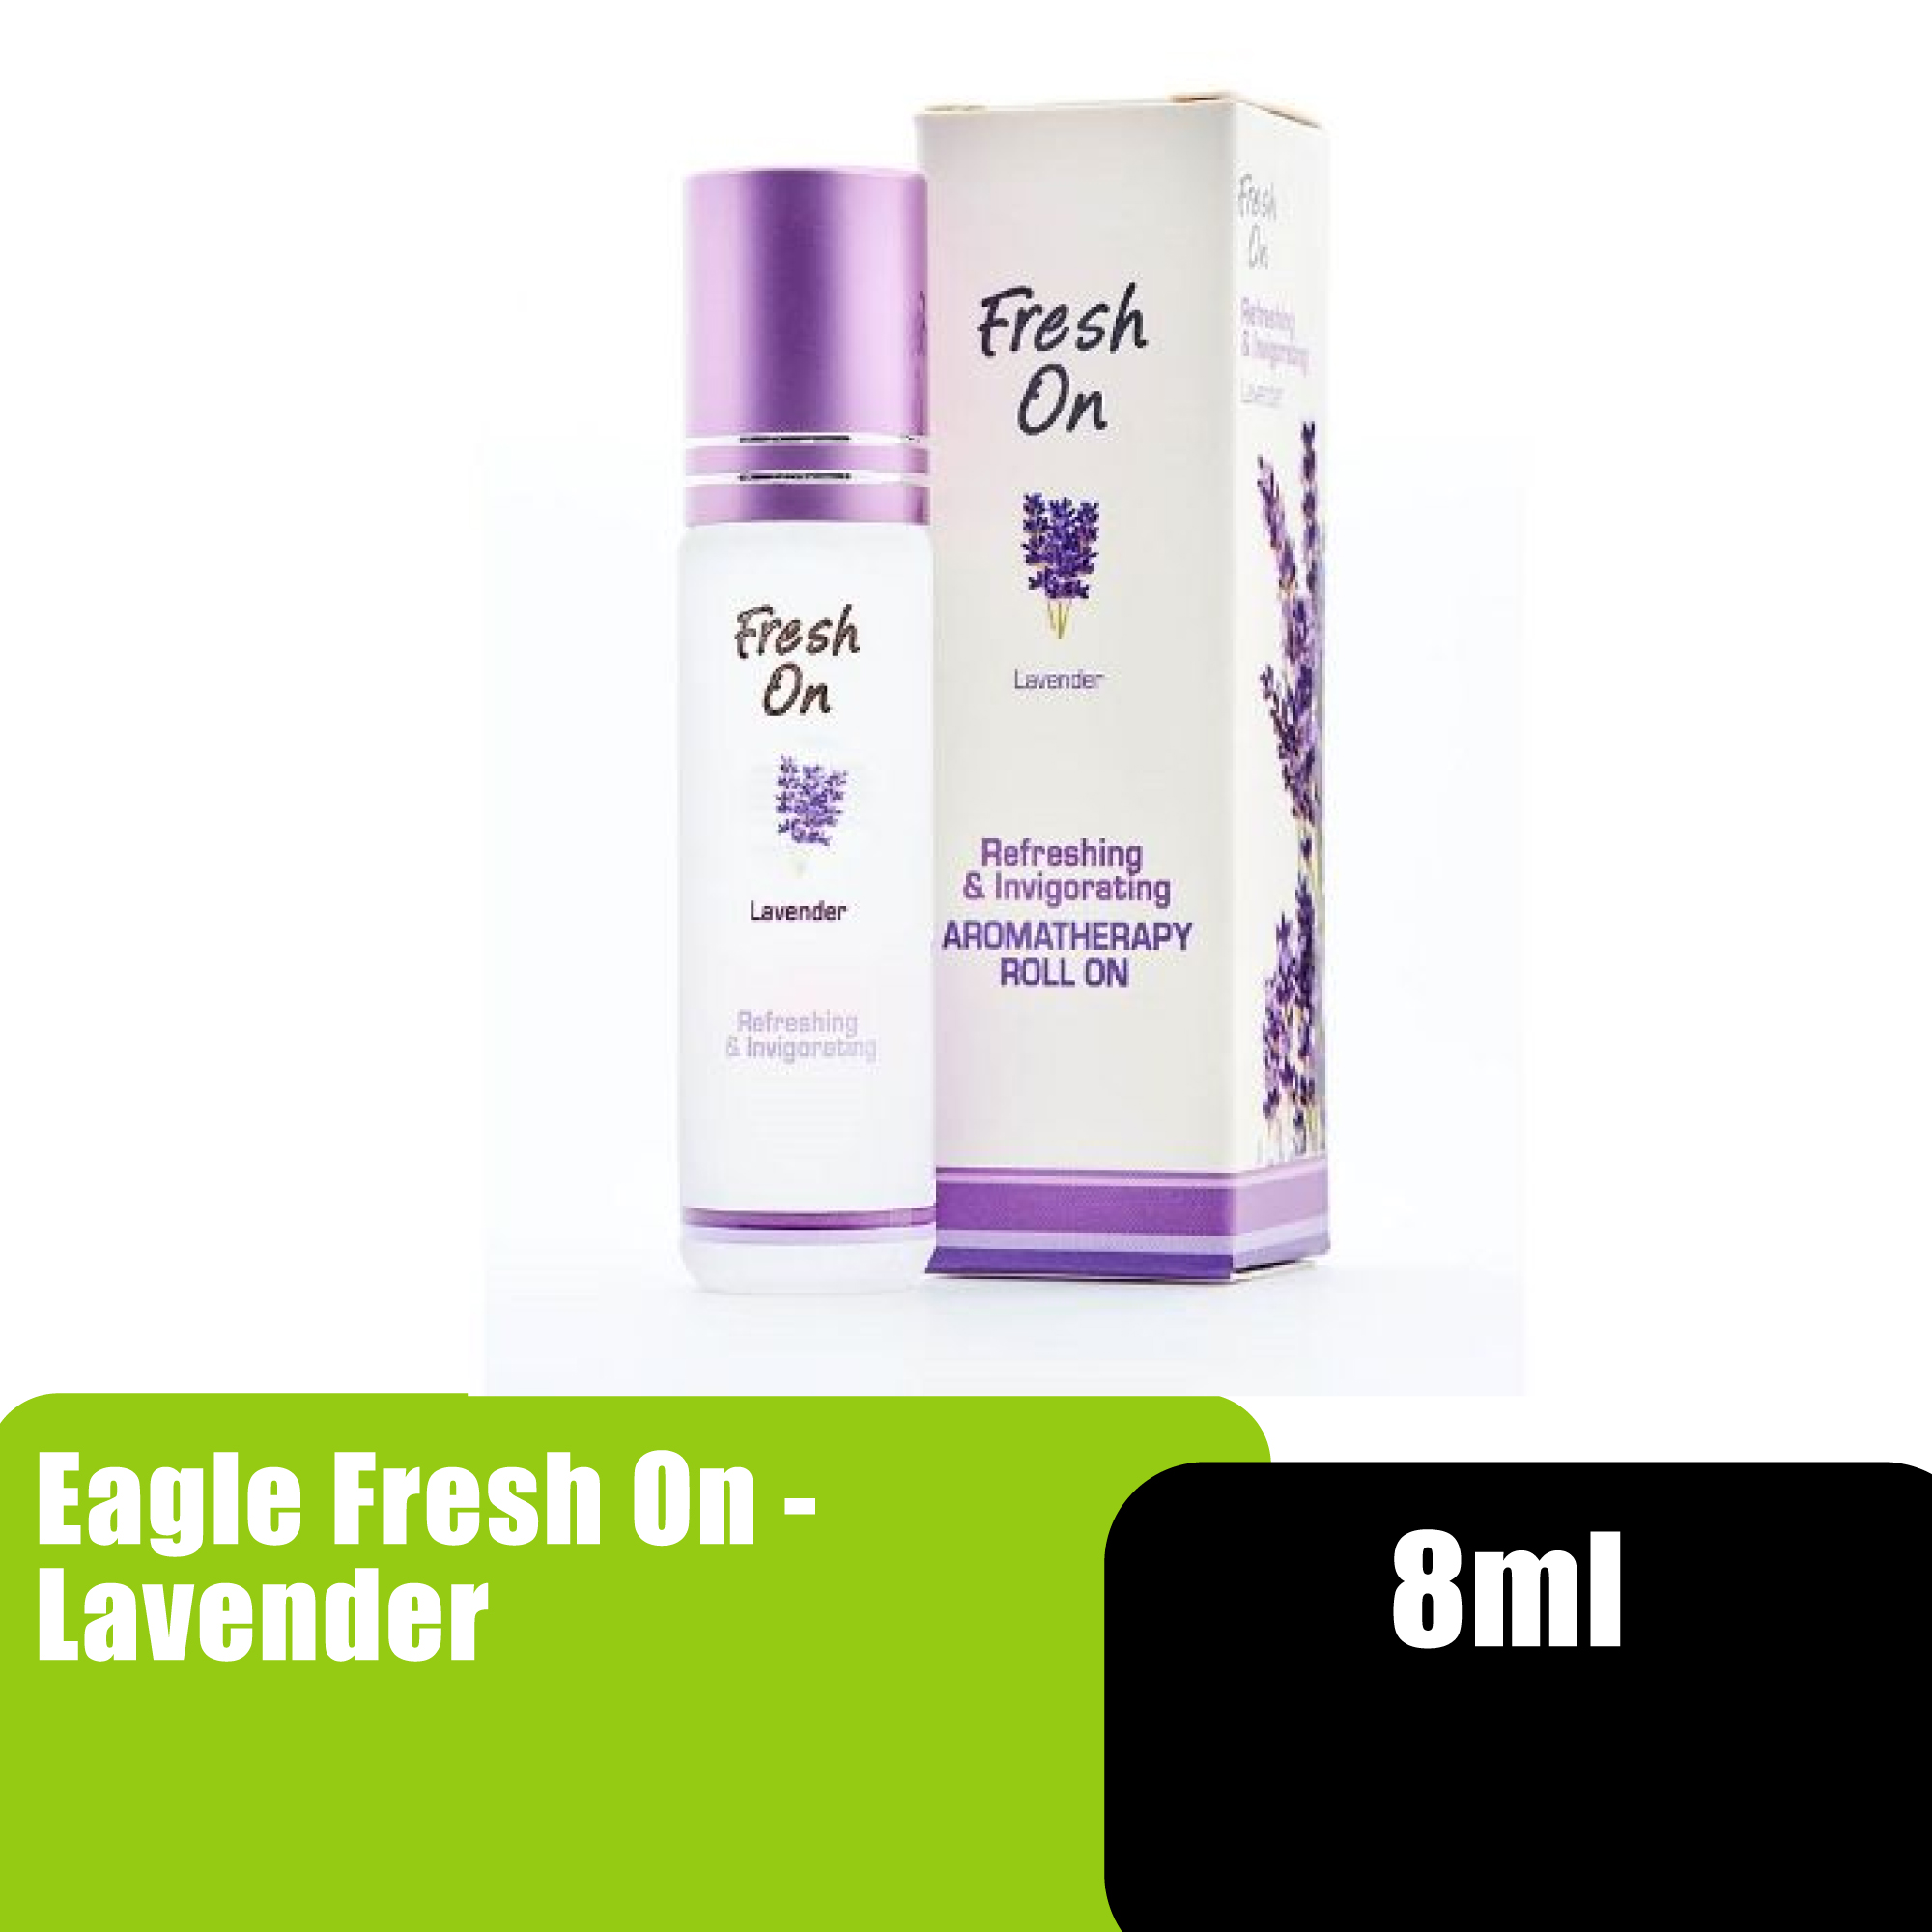 Eagle Fresh On Roll on Aromatherapy Oil 8ml - Lavender / 滚珠薰衣草精油 (Calms Sences & Reduces Anxiety)